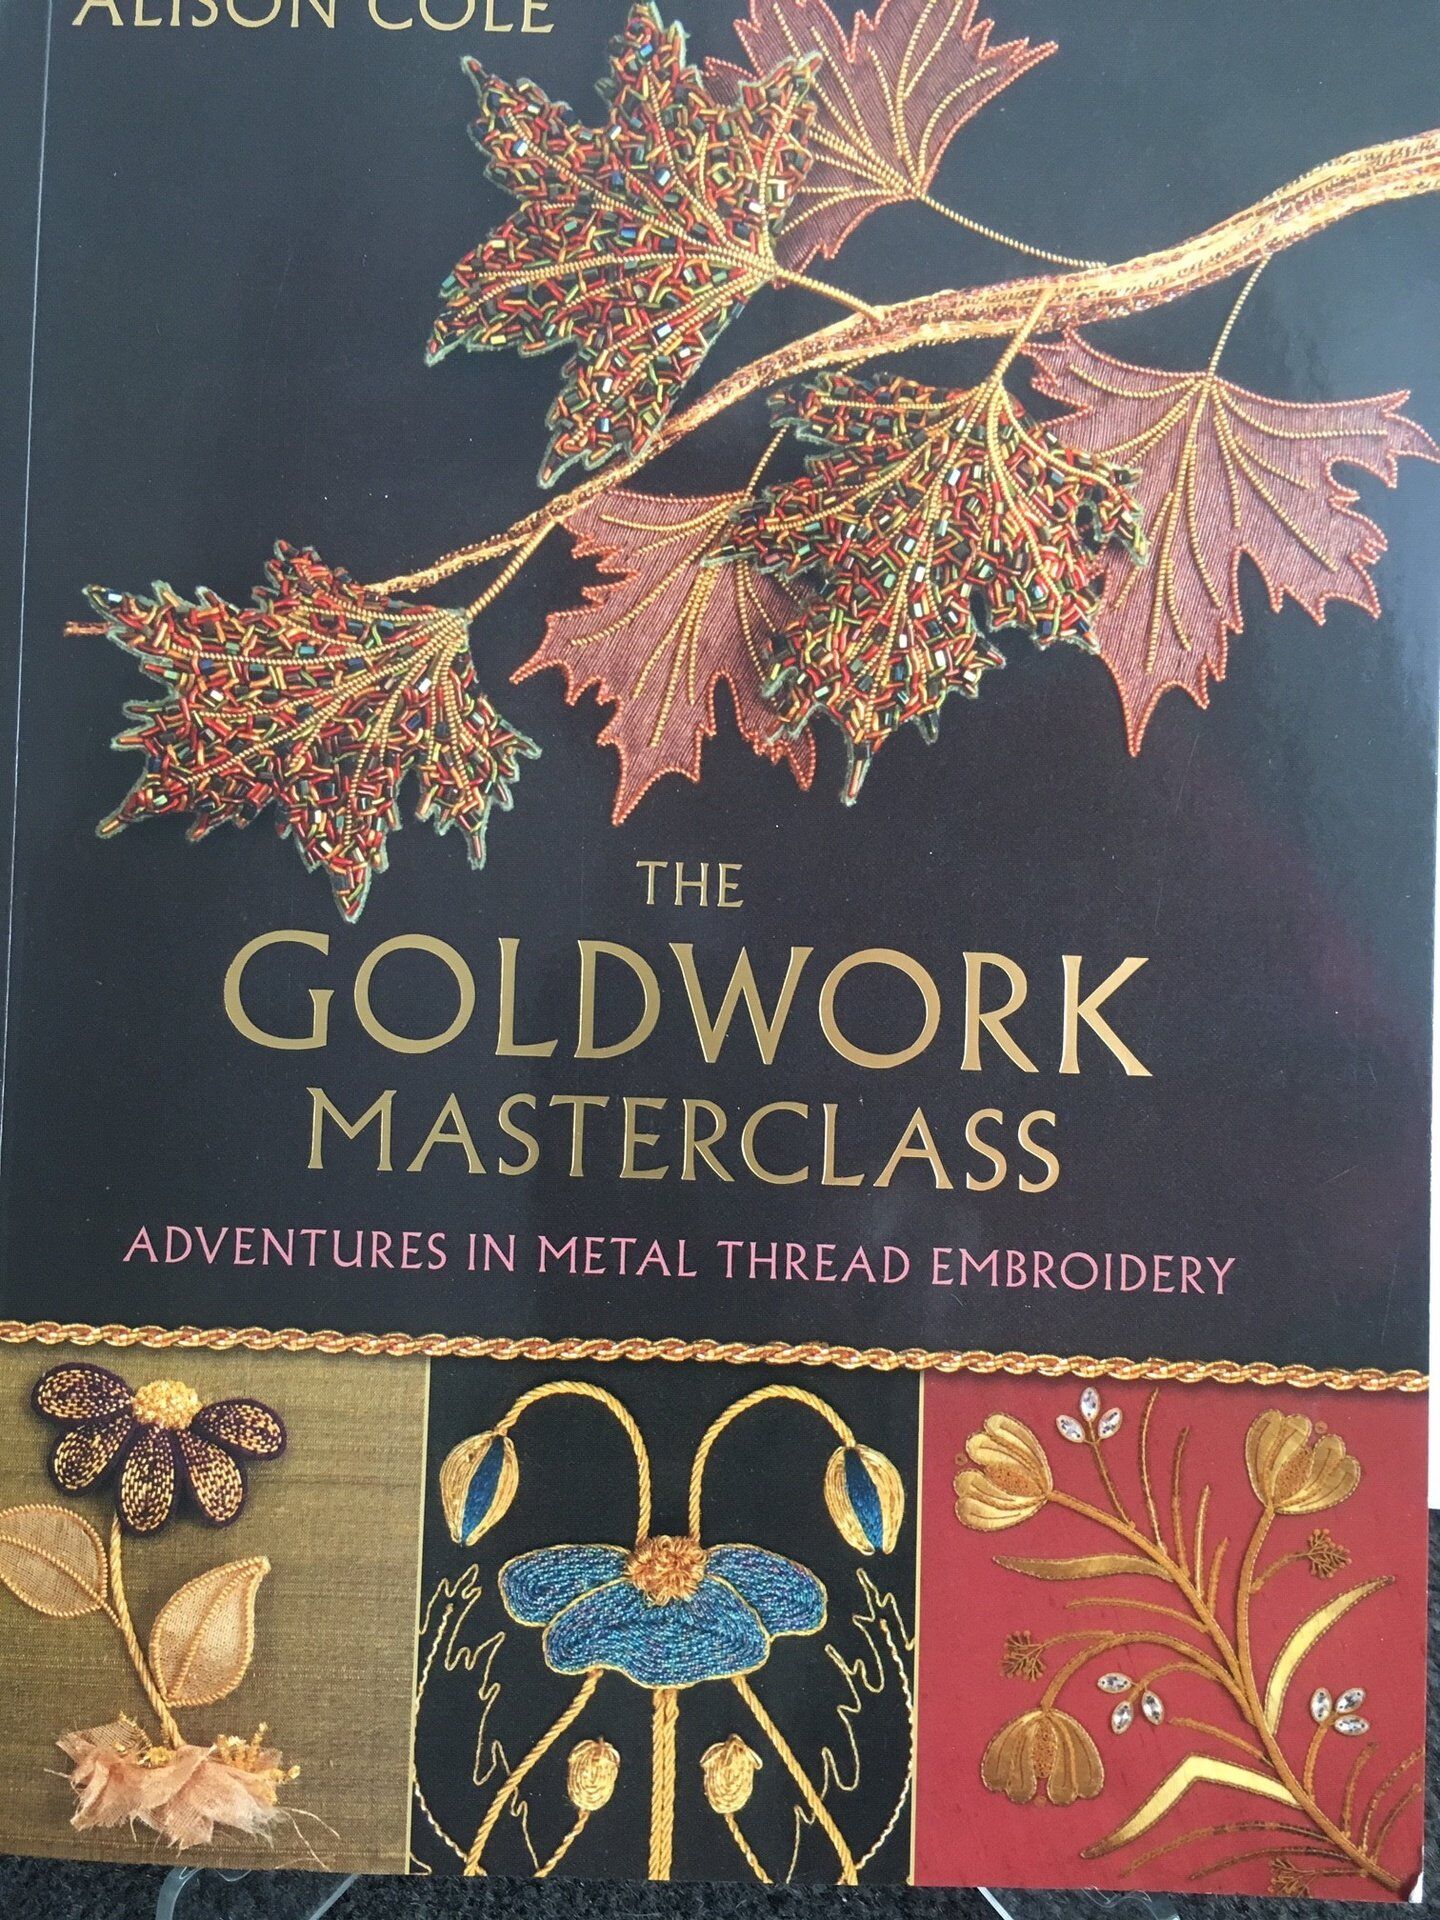 Book: The Goldwork Masterclass: Adventures In Metal Thread Embroidery